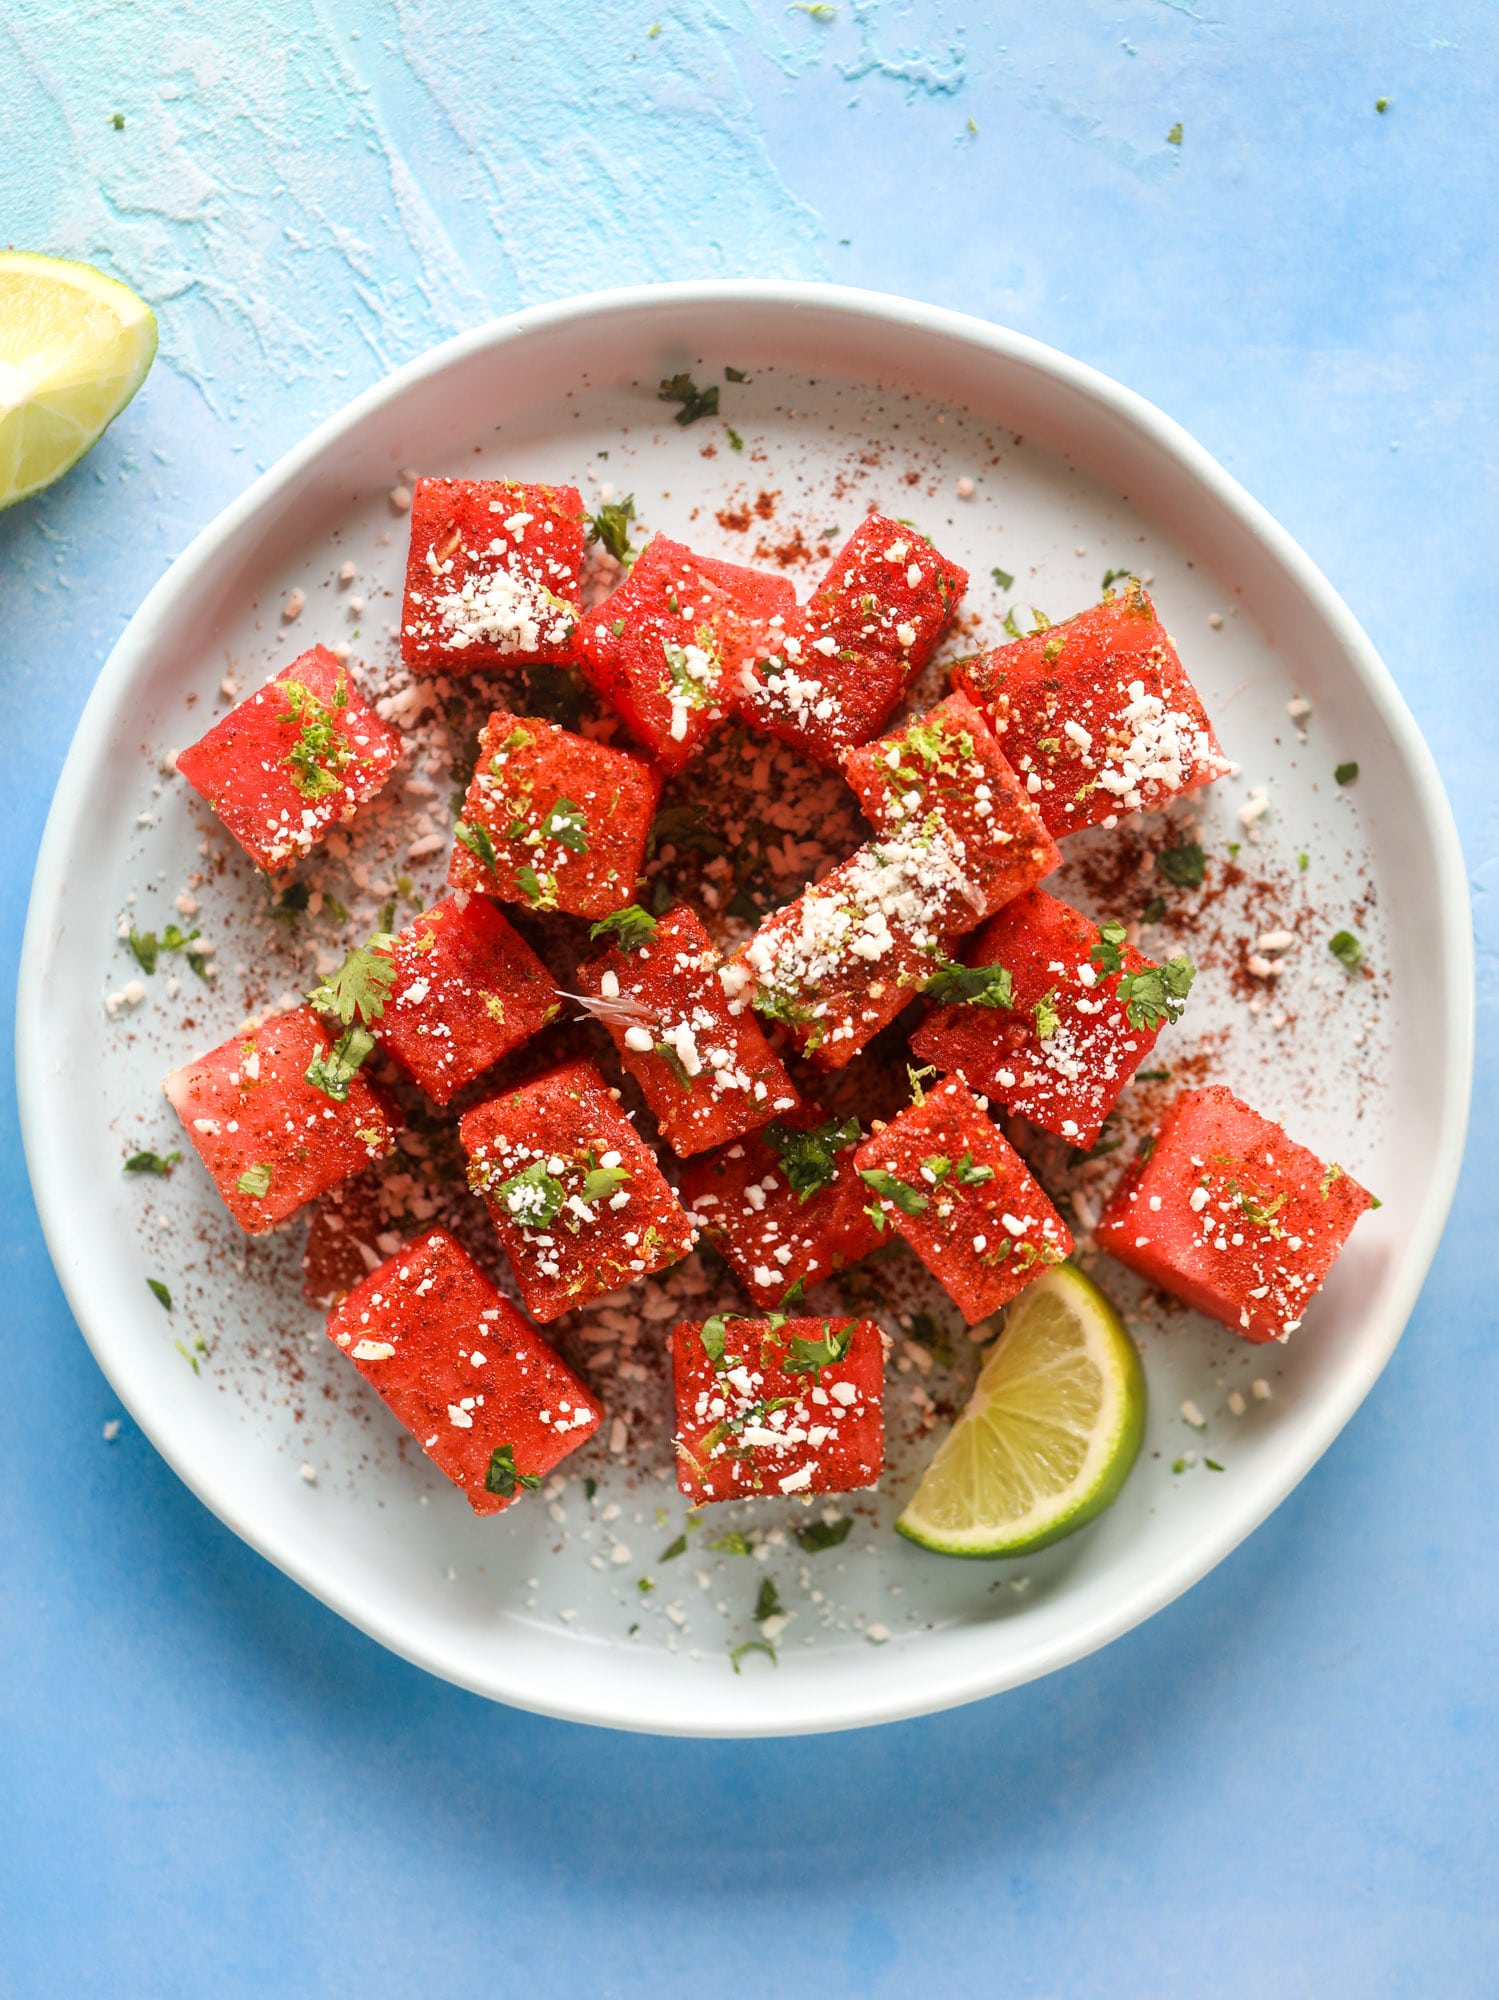 This chili lime watermelon is the perfect summer snack! It's savory and sweet with crumbled cotija cheese and lots of lime. Delish!